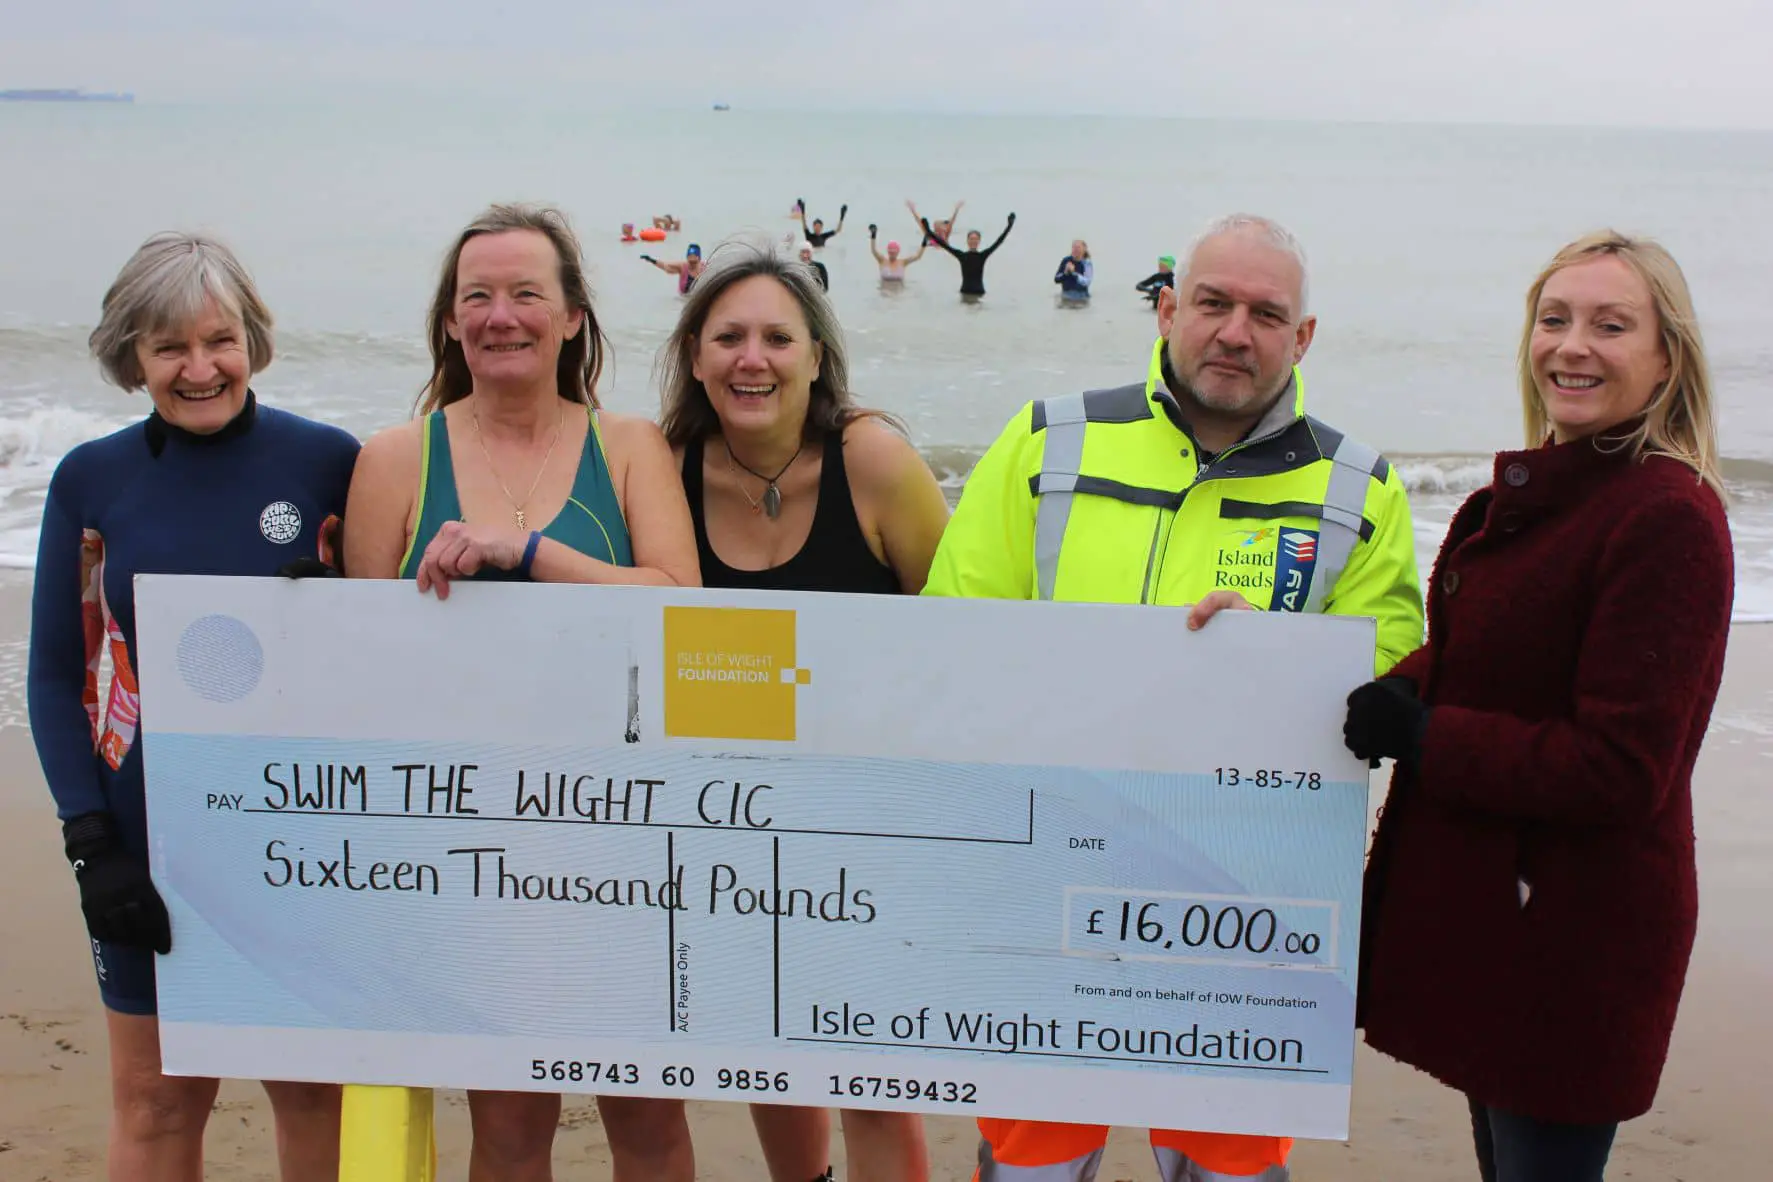 IW Foundation swimmers with giant cheque